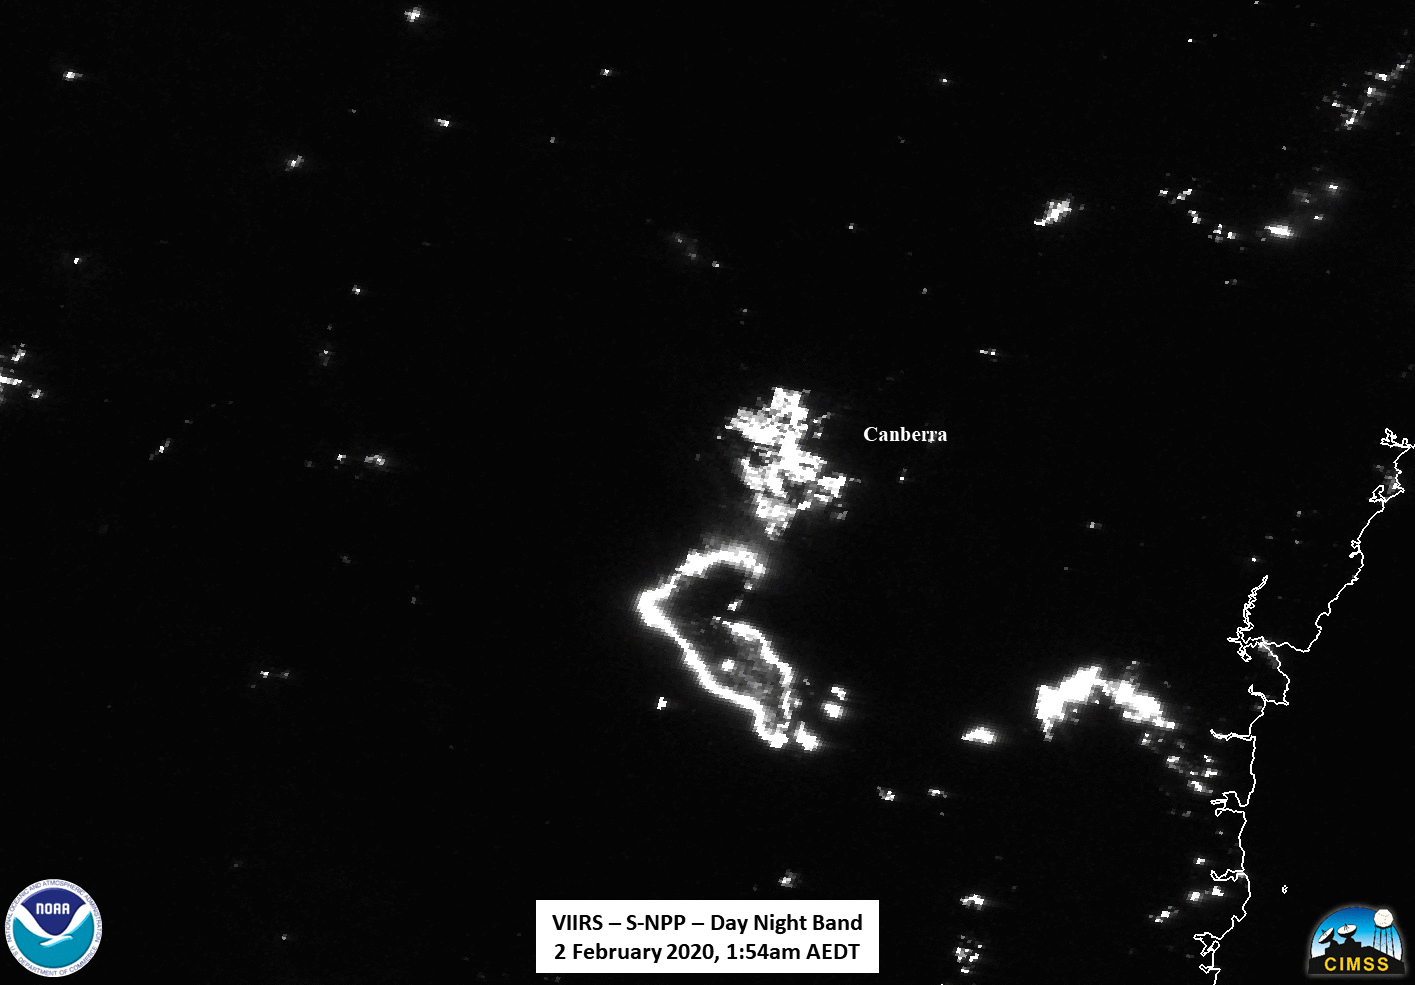 Suomi NPP VIIRS Day/Night Band (0.7 µm) and Shortwave Infrared (3.74 µm) images at 1454 UTC [click to enlarge]